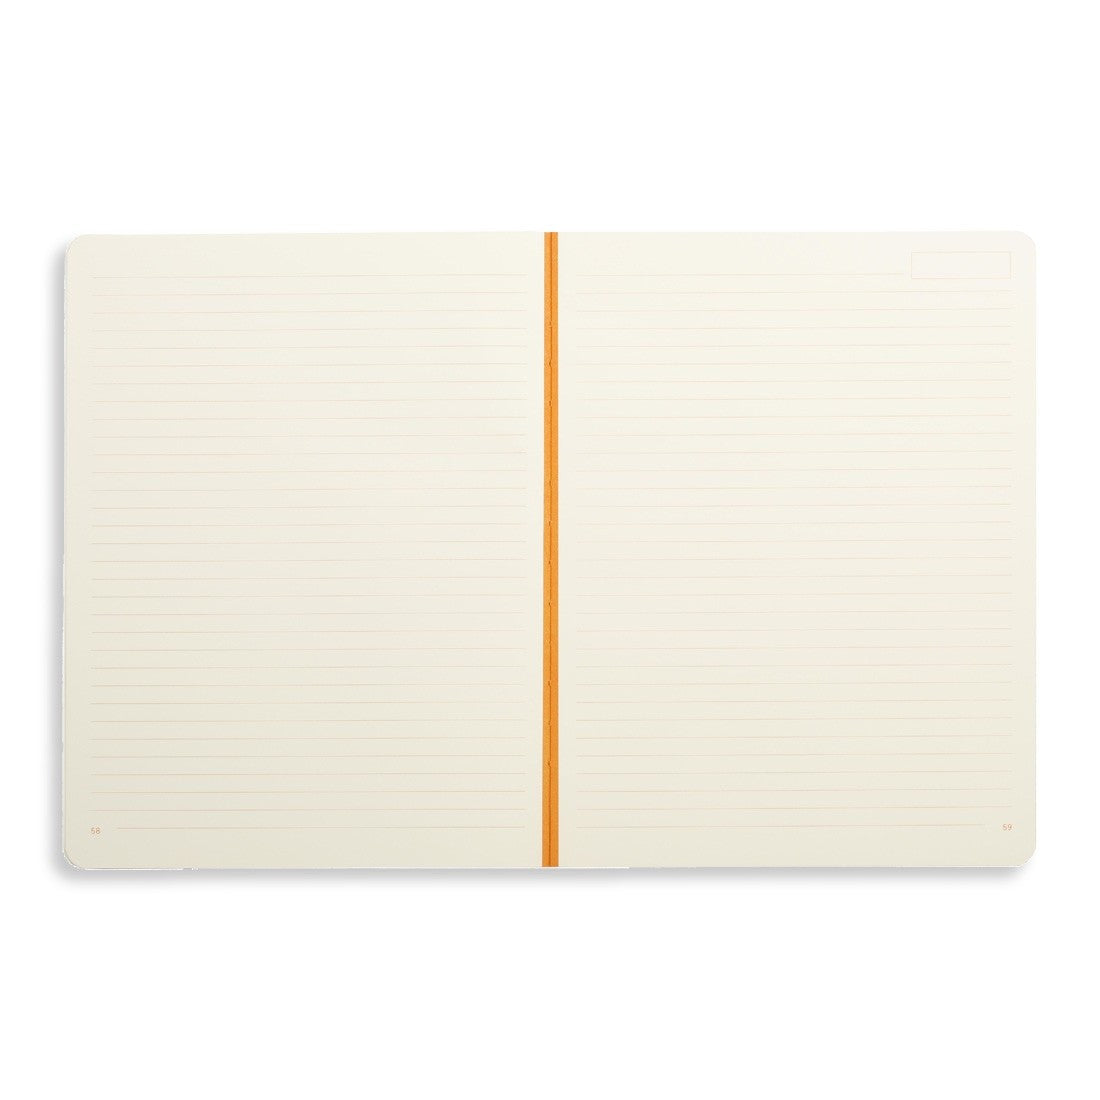 RHODIA Heritage Raw 190x250mm Lined Moucheture Ivory Default Title